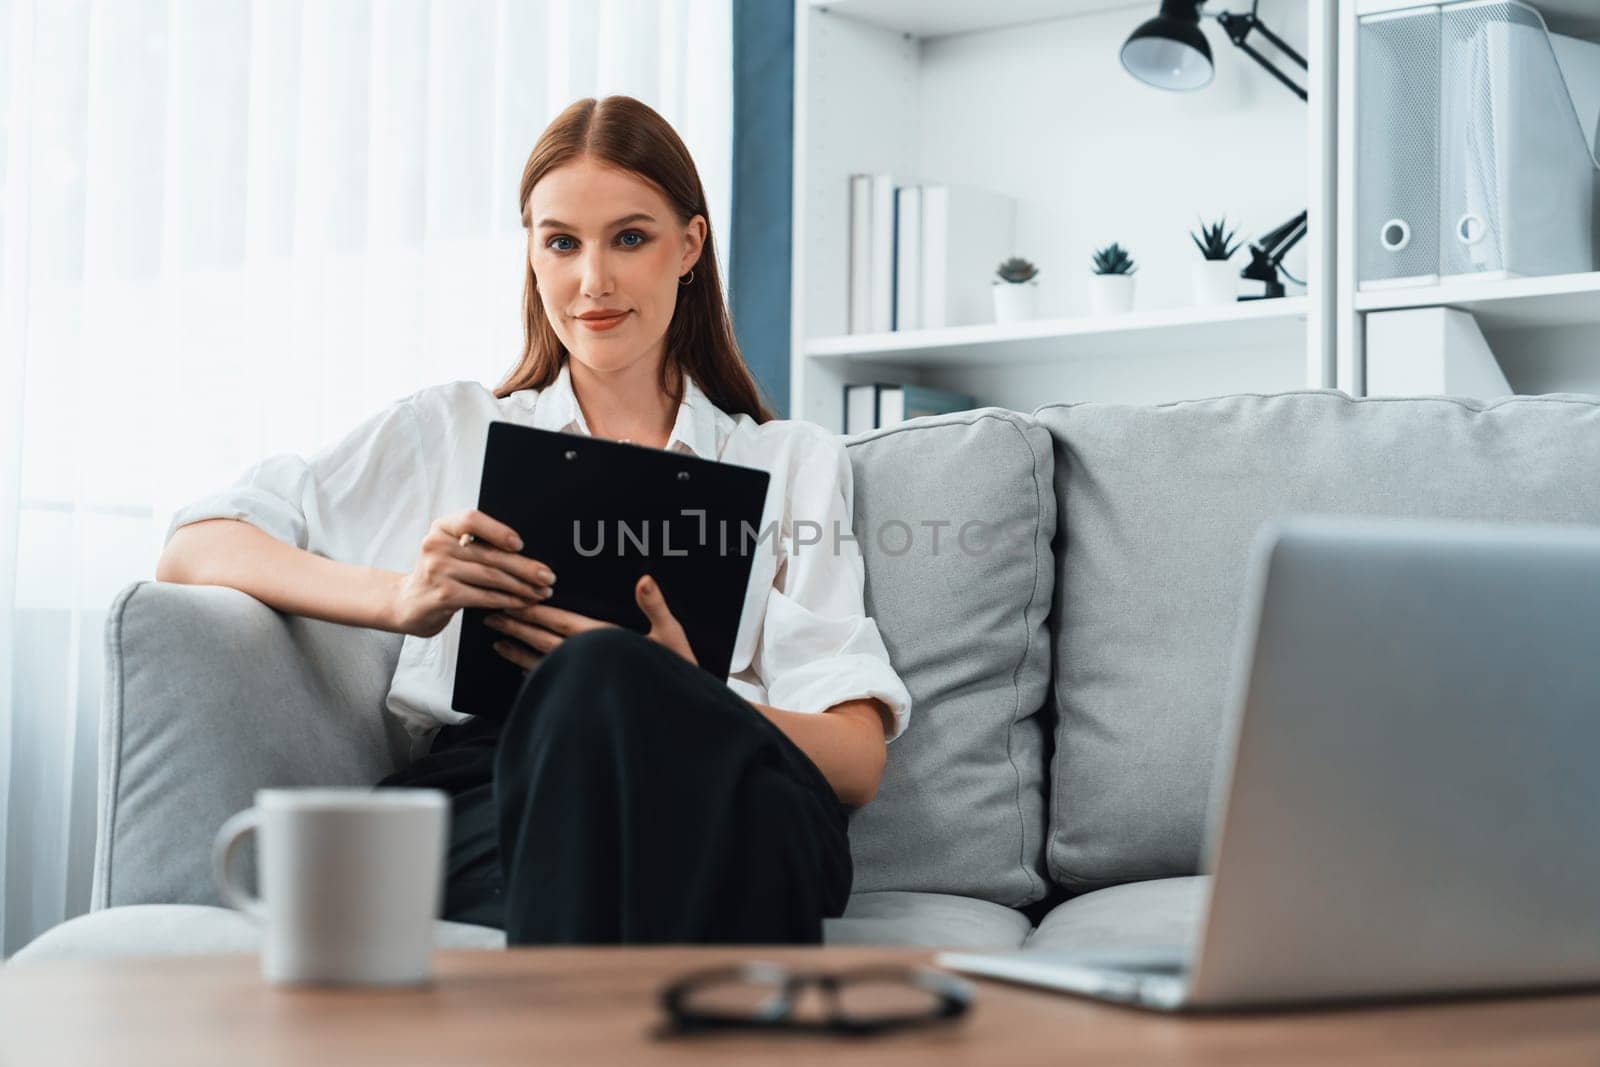 Psychologist woman in clinic office professional portrait with friendly smile feeling inviting for patient to visit the psychologist. The experienced and confident psychologist is utmost specialist